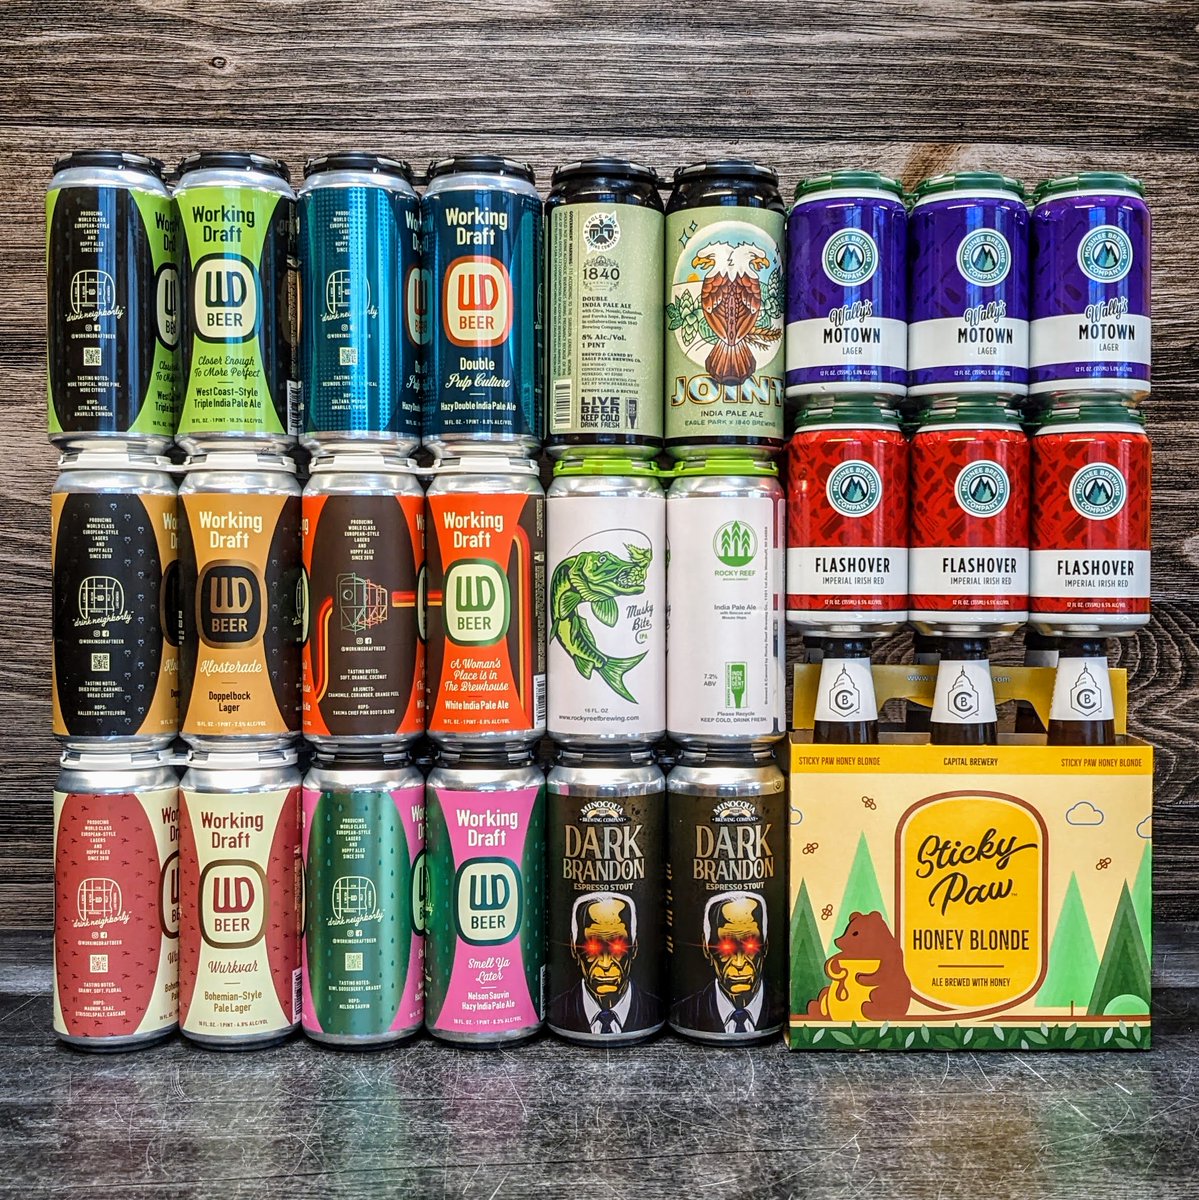 Well would ya look at that? Its #WiBeerWednesday! @WorkingDraftBC new lagers and new hops! @EagleParkBeer x @1840BrewingCo Joint IPA! @MosineeBrewing new brewery! @CapBrew new beer! #MBC Dark Brandon back in stock! #DrinkLocal #WiCraftBeer #LagerIsLife